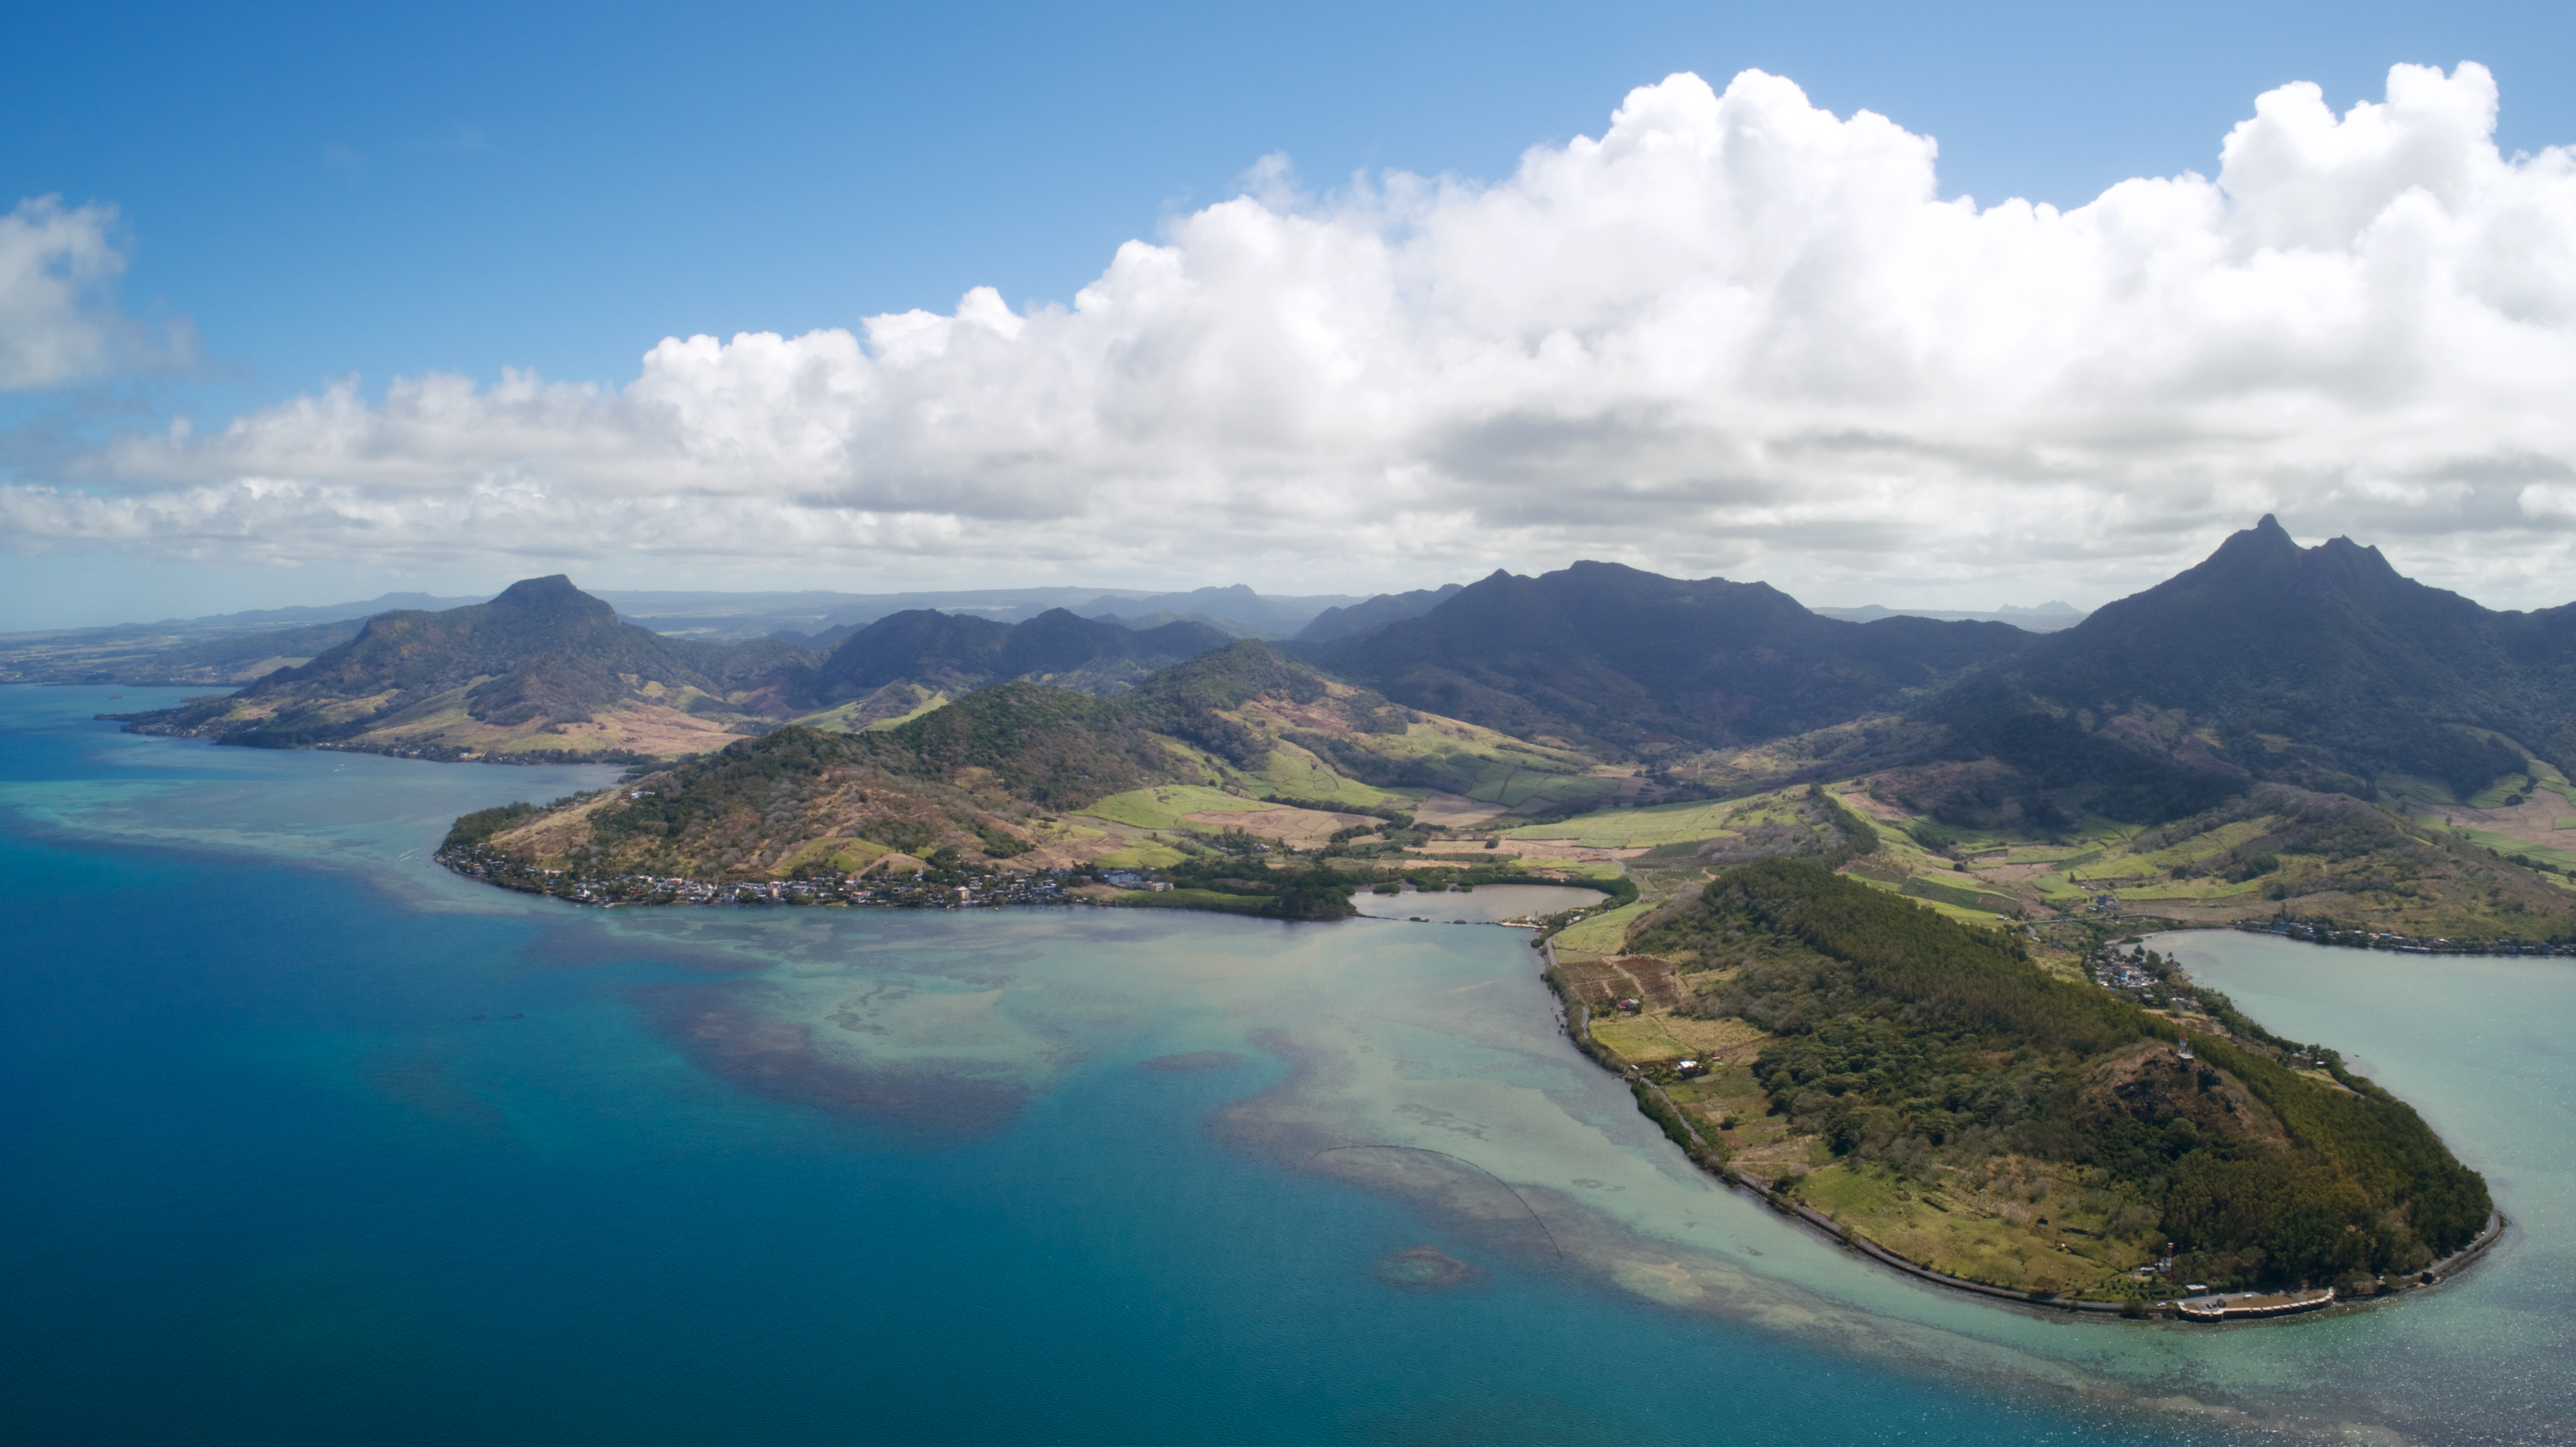 Aerial view of the South East coast of Mauritius